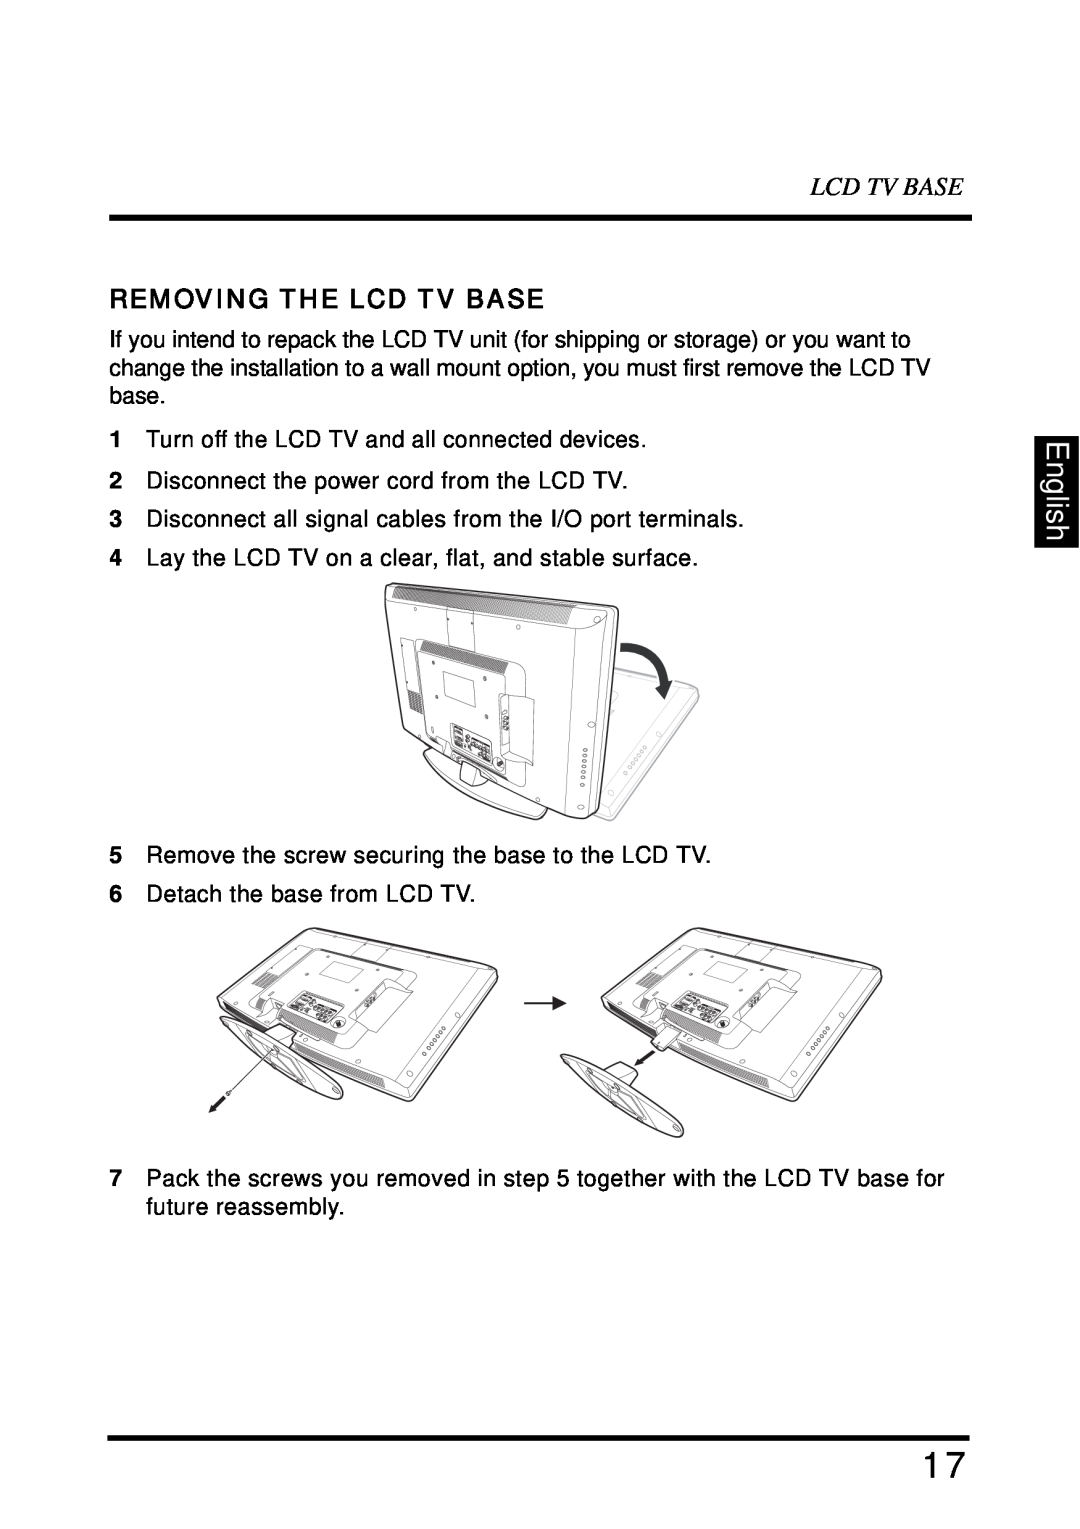 Westinghouse SK-32H640G user manual English, Removing The Lcd Tv Base 